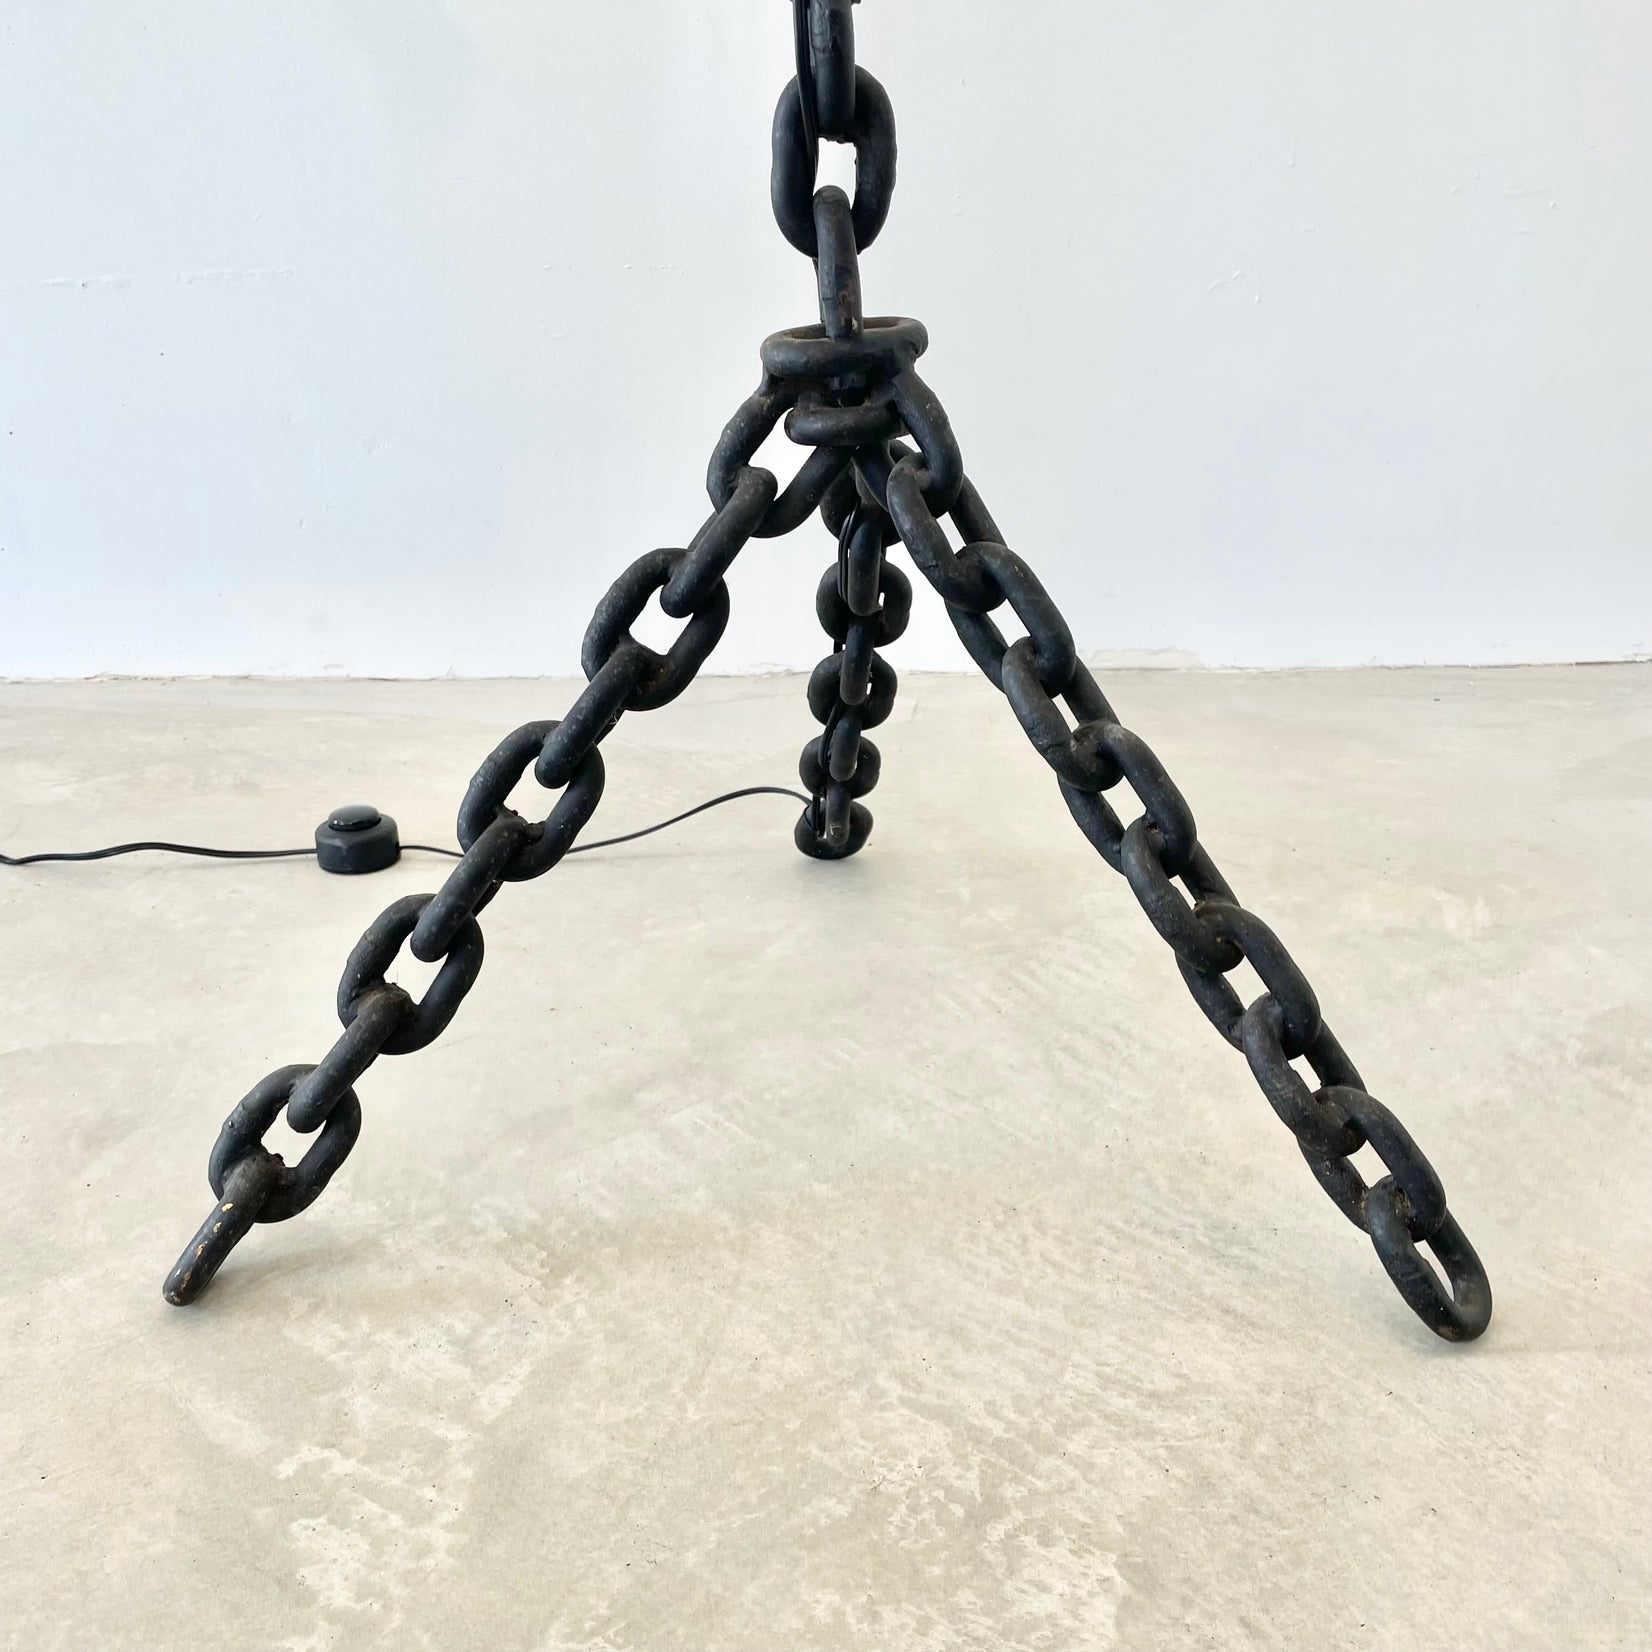 French Chain Tripod Floor Lamp, 1960s France